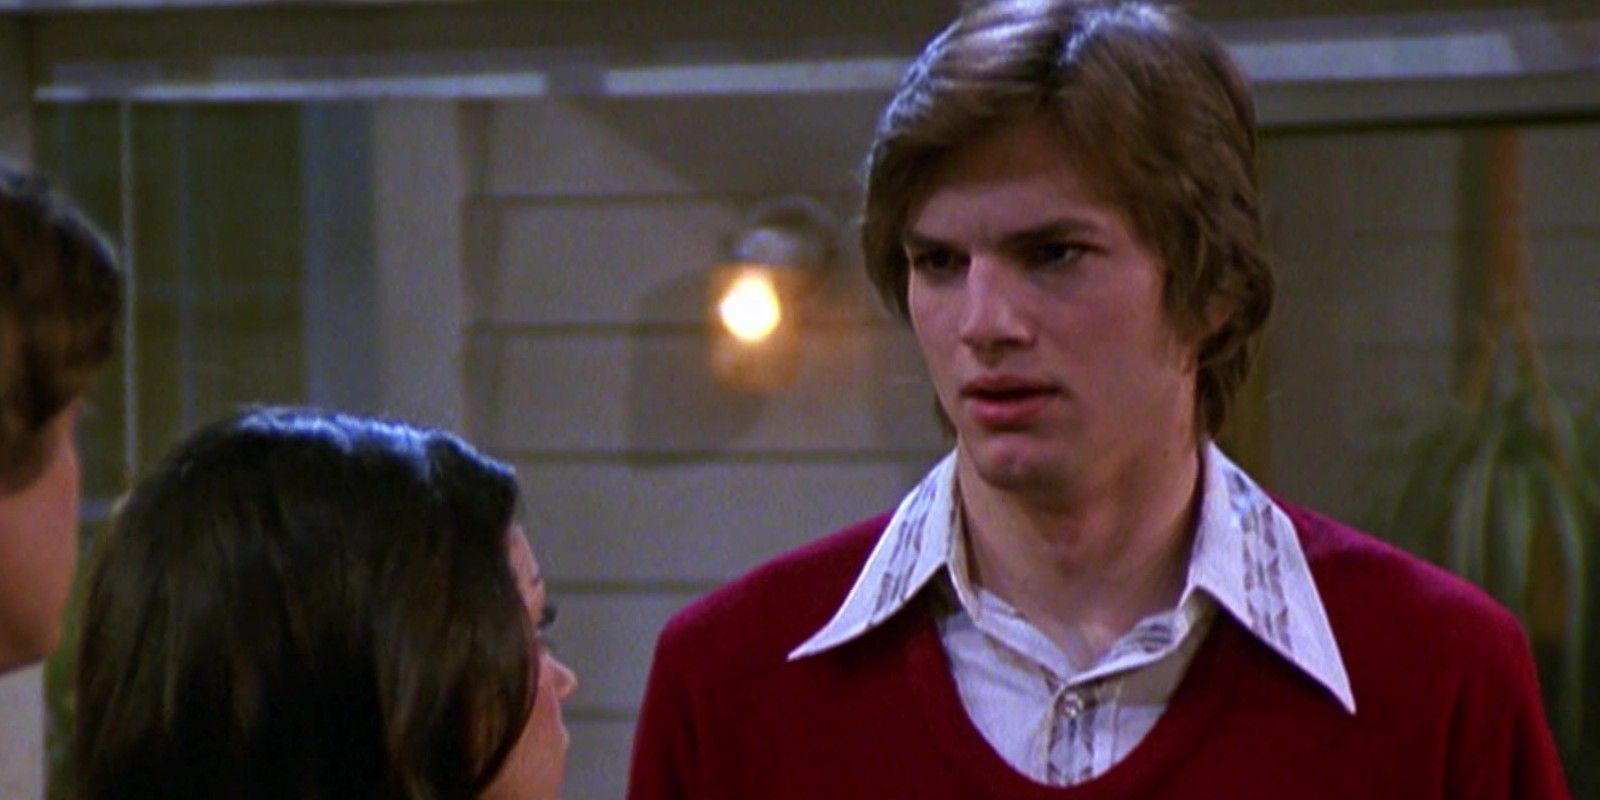 Michael Kelso, played by Ashton Kutcher, in That '70s Show